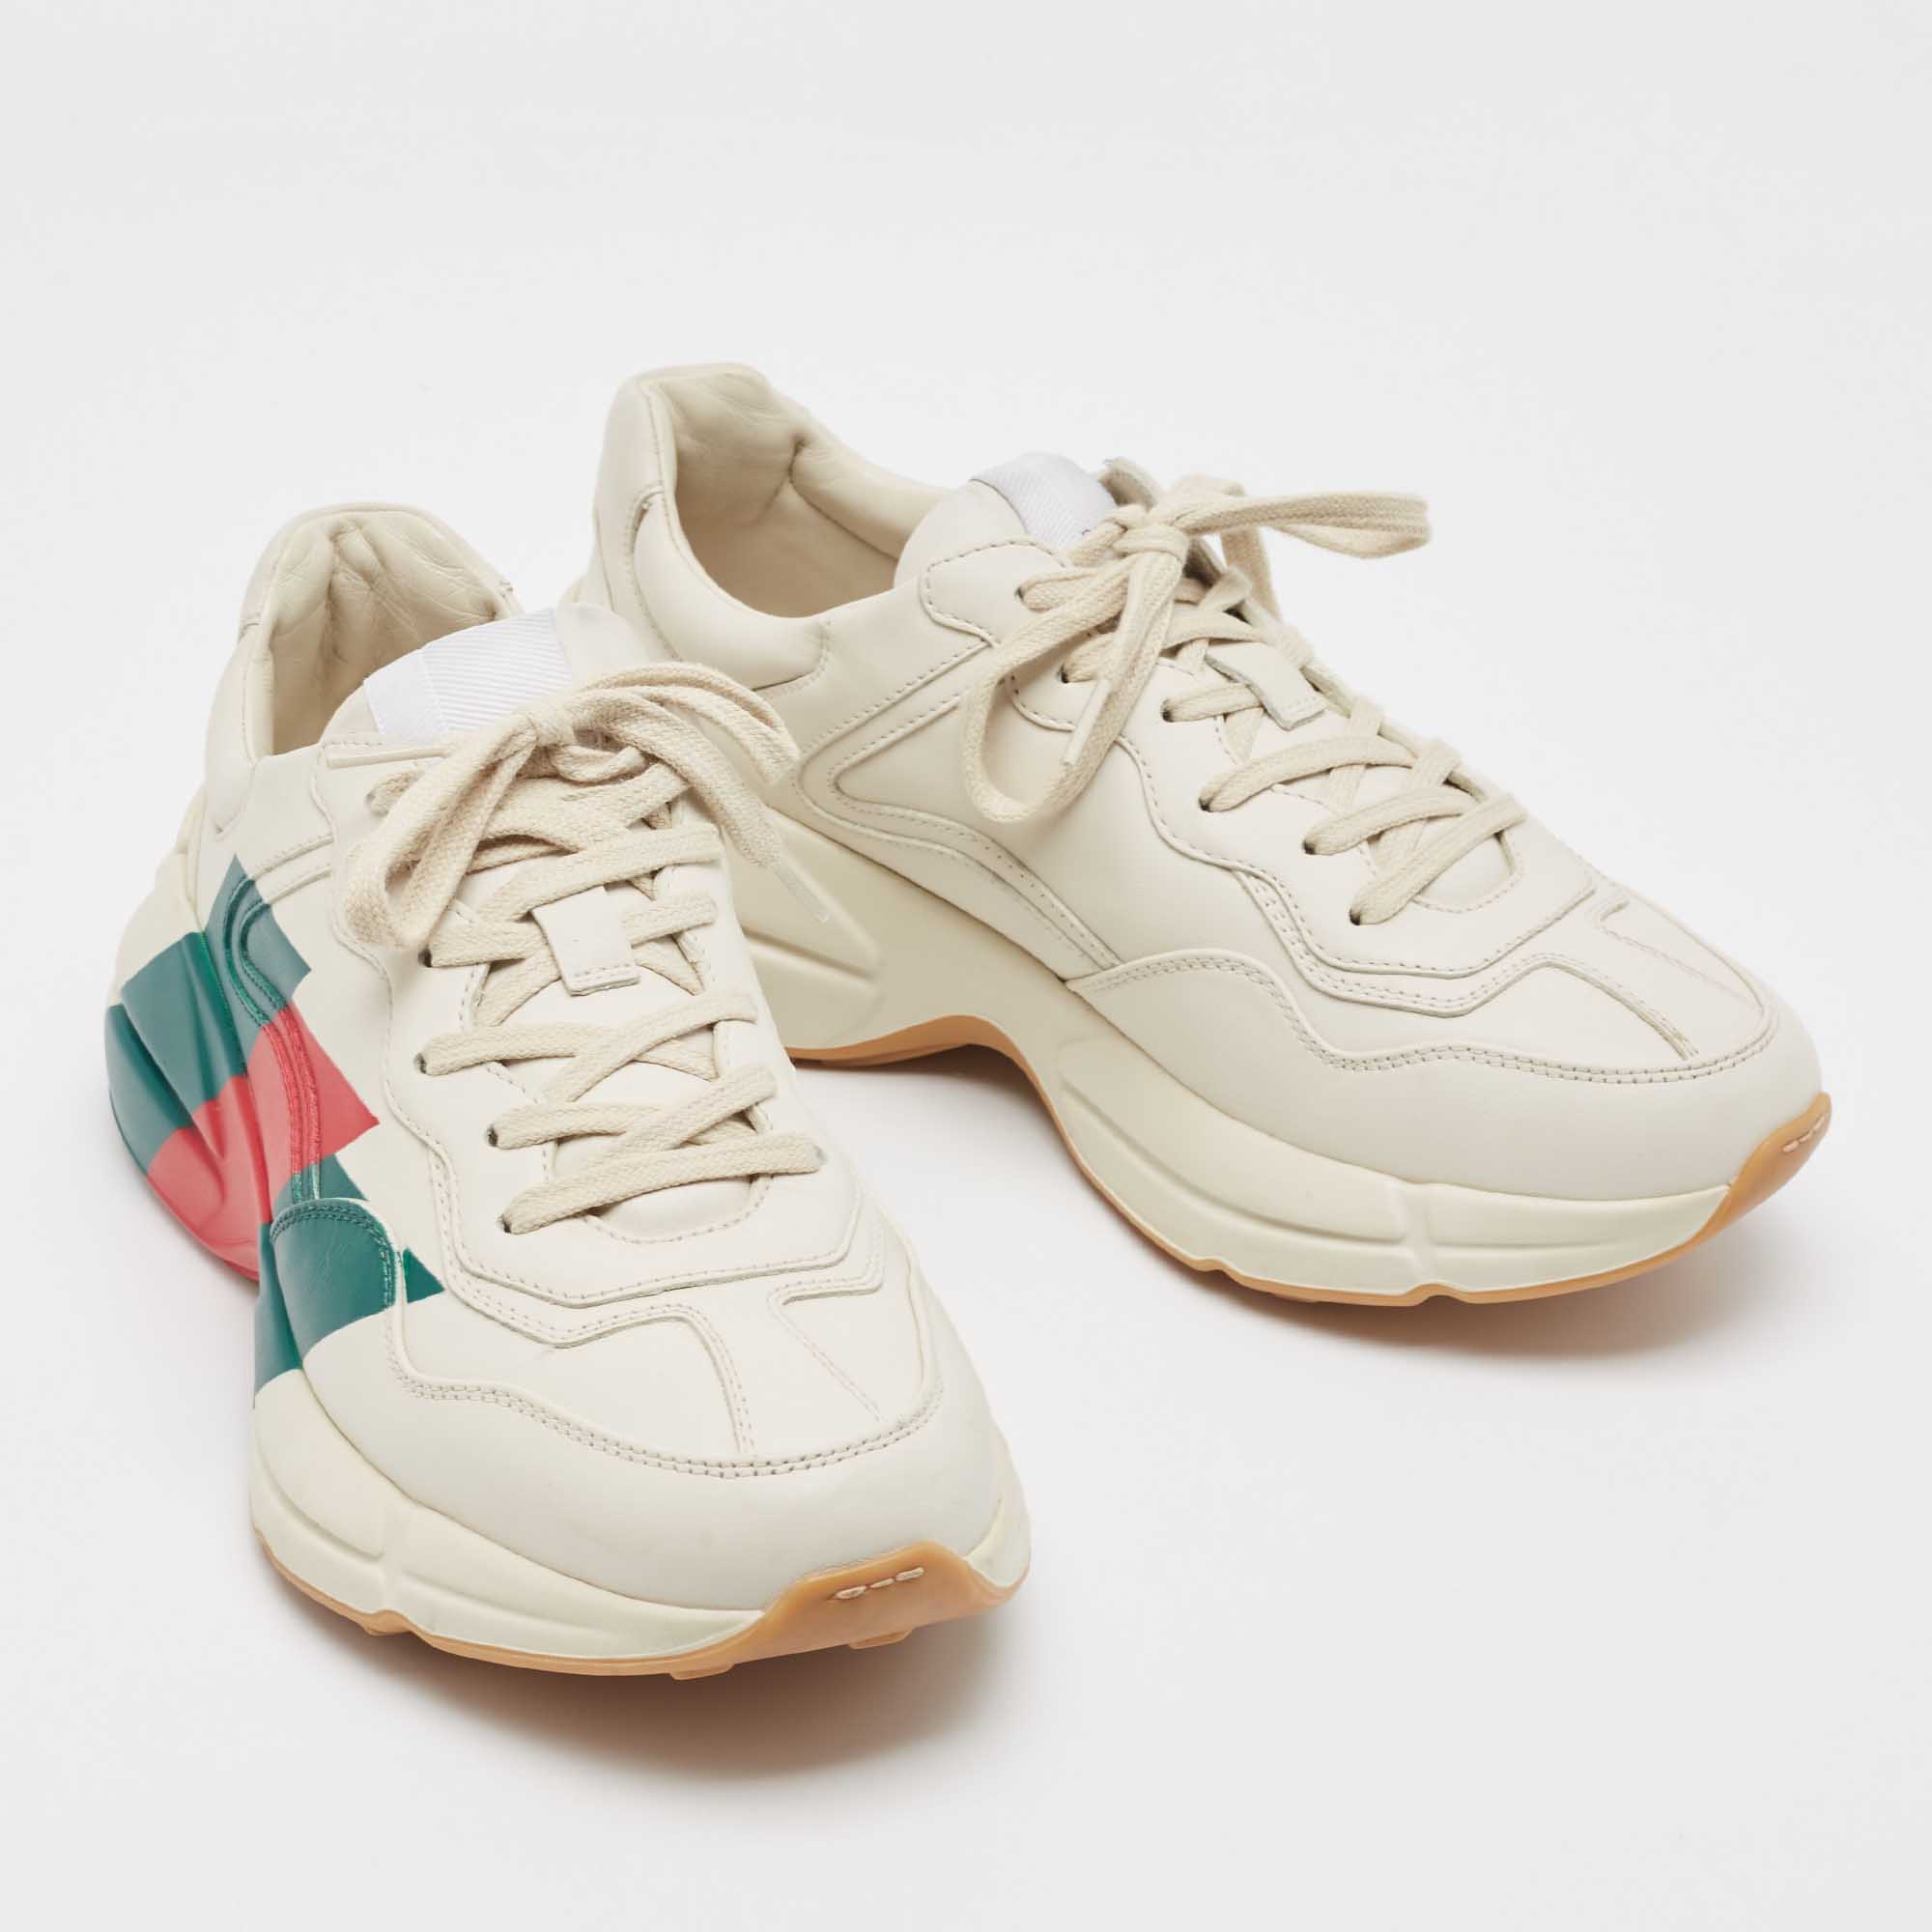 Gucci Cream Leather Web Print Rhyton Sneakers Size 41